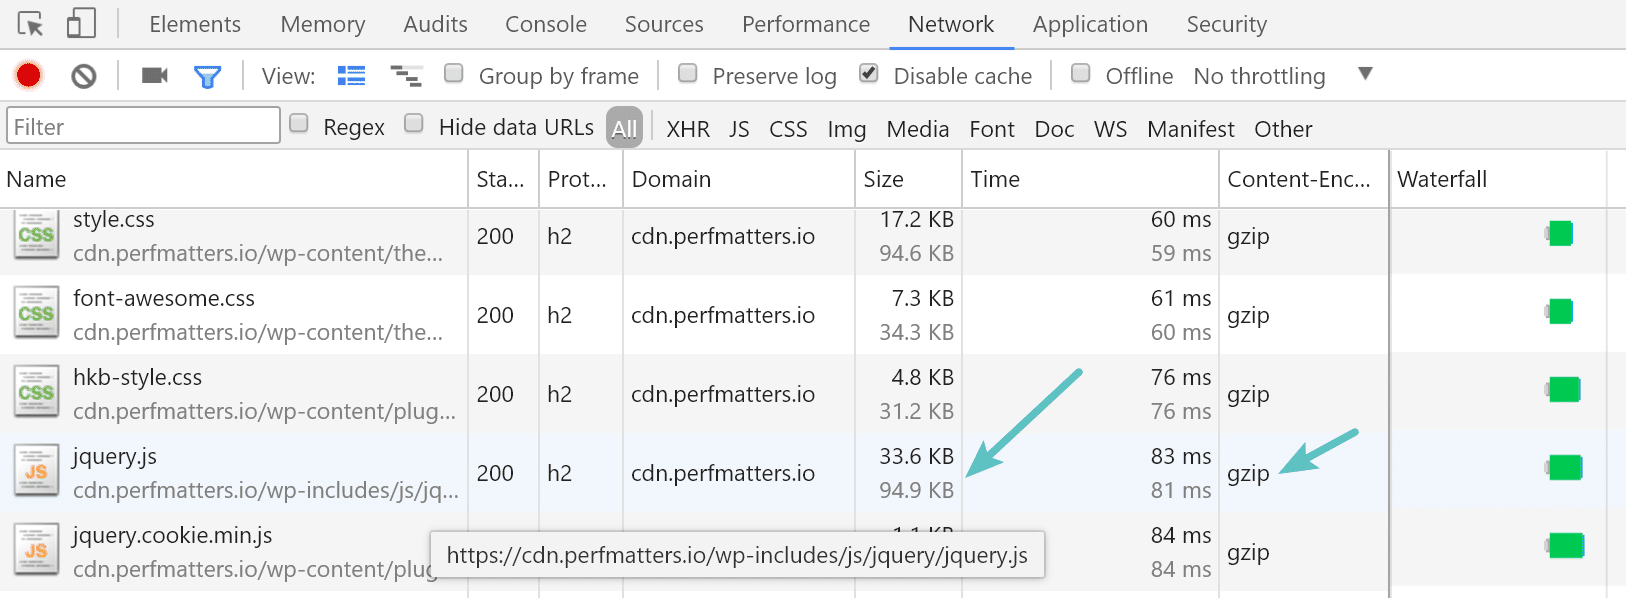 Savings with GZIP compression